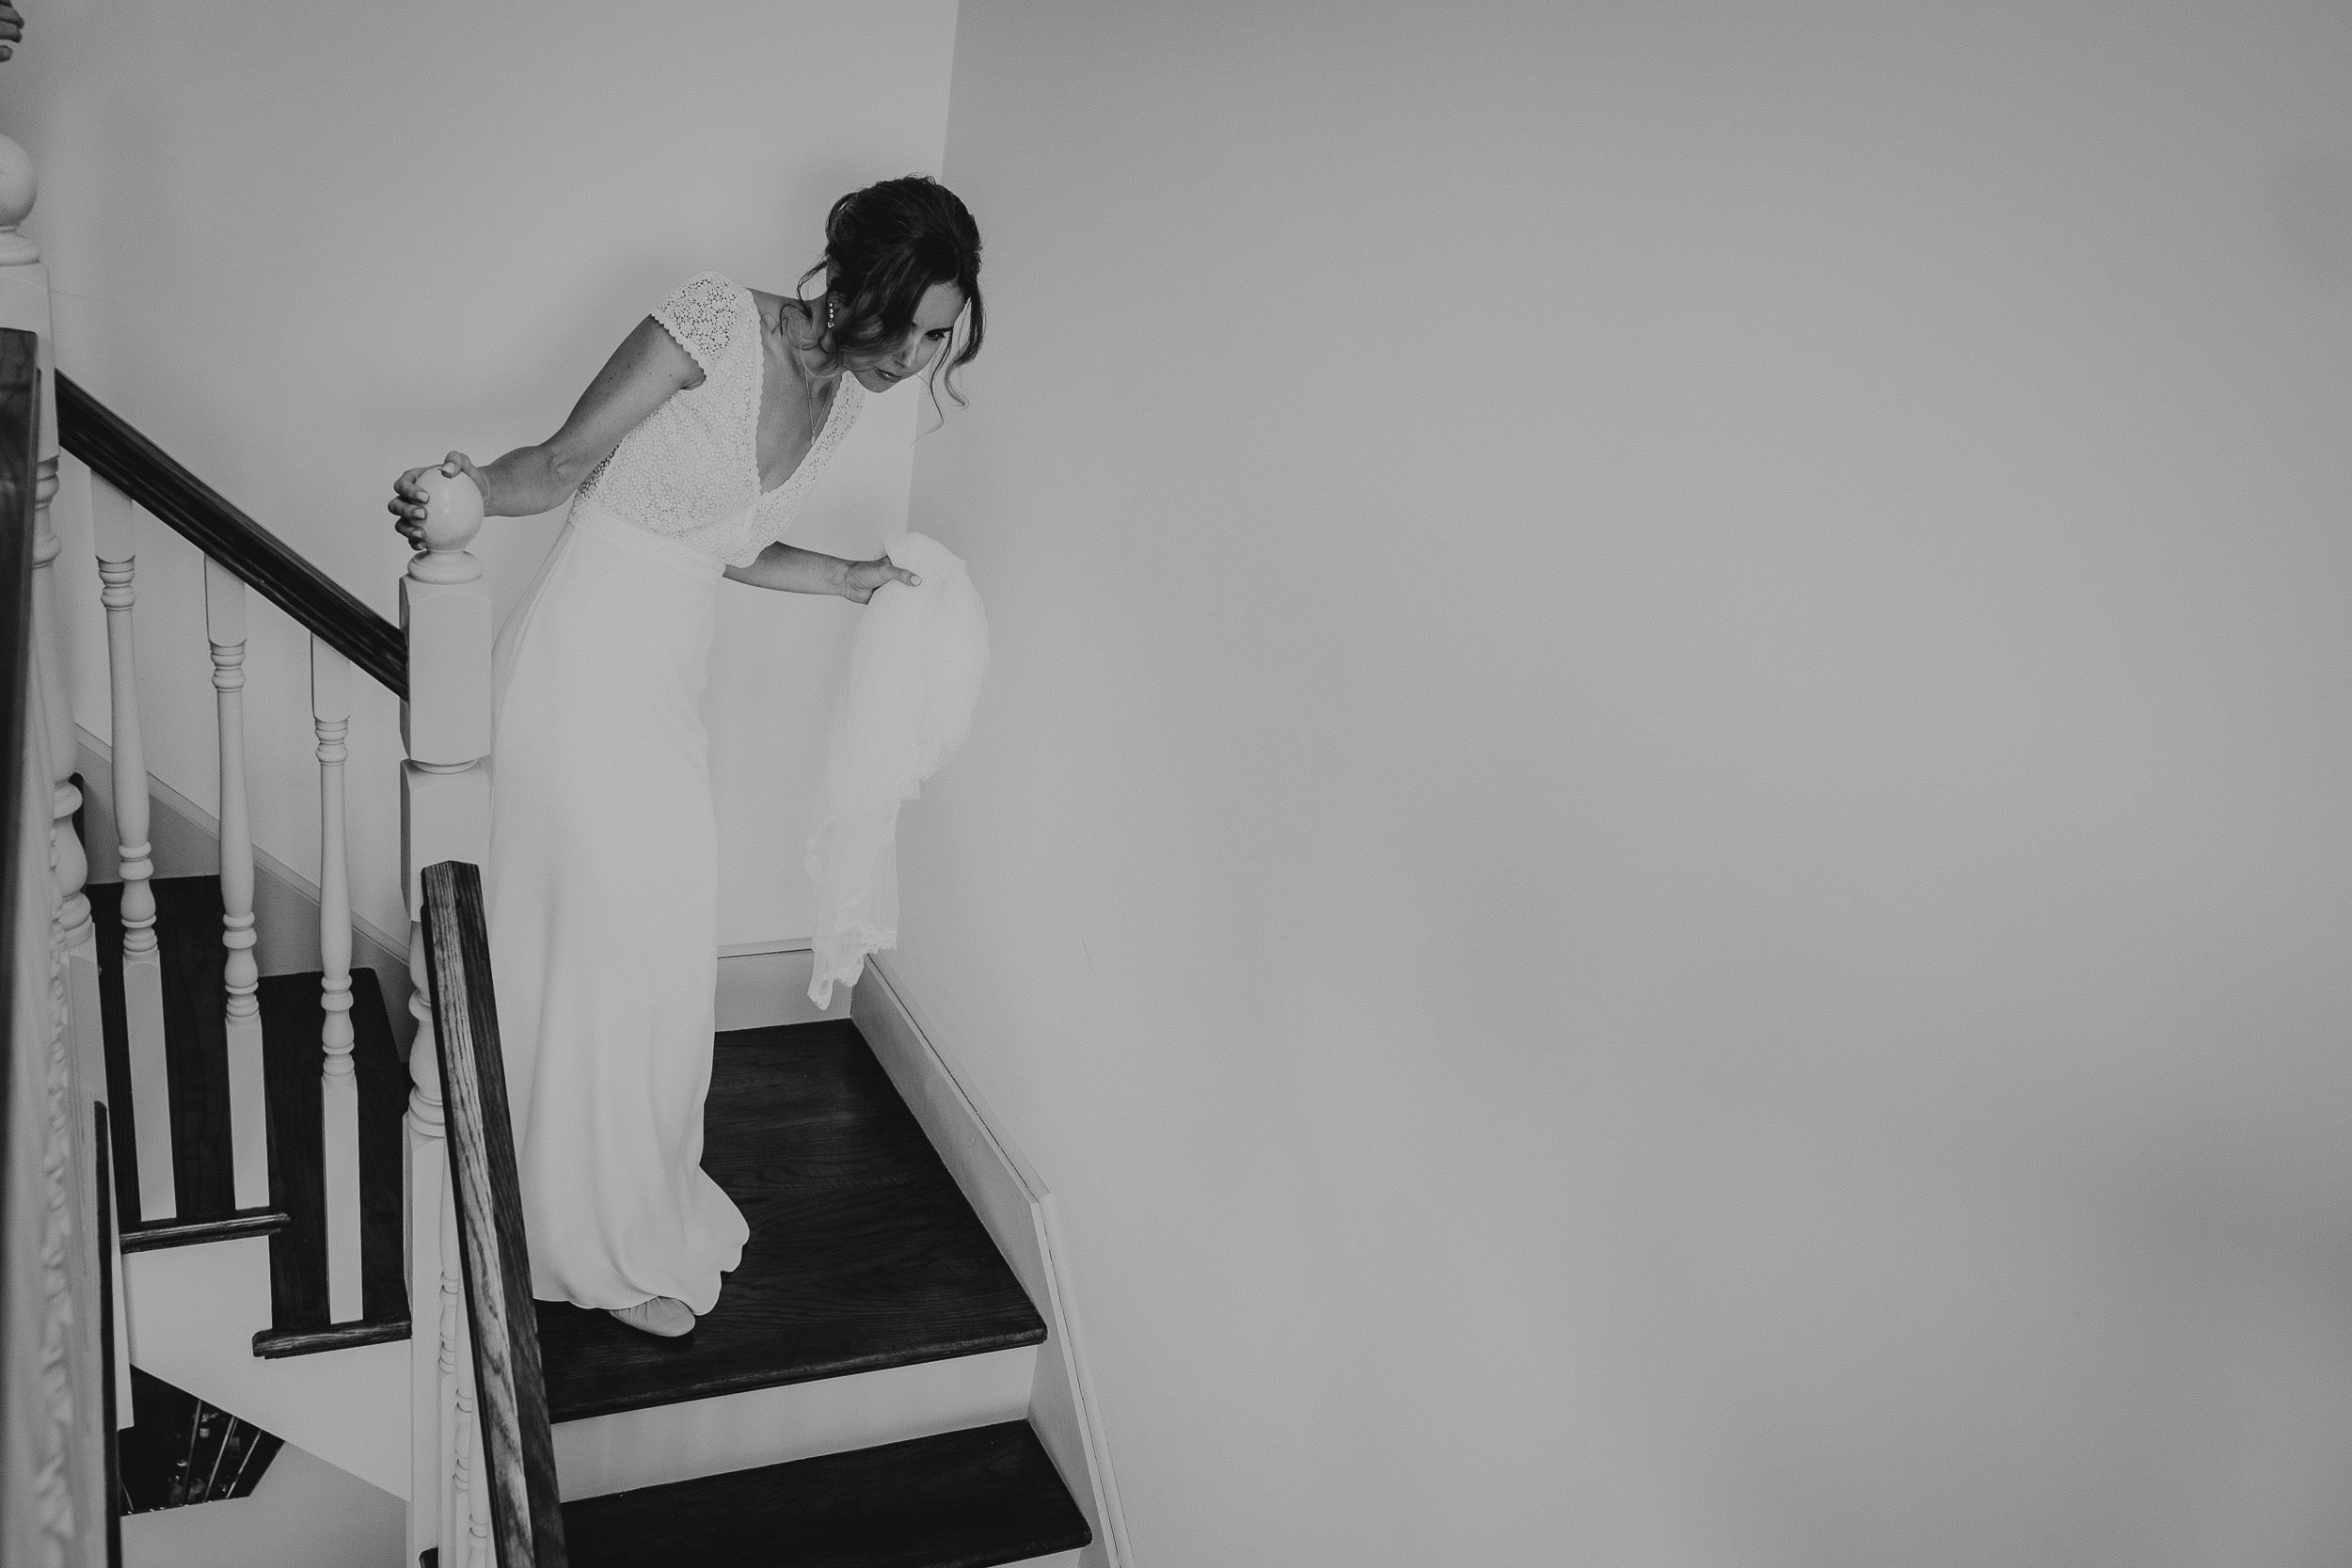 A wedding photo capturing a bride gracefully descending the stairs in her elegant white dress.